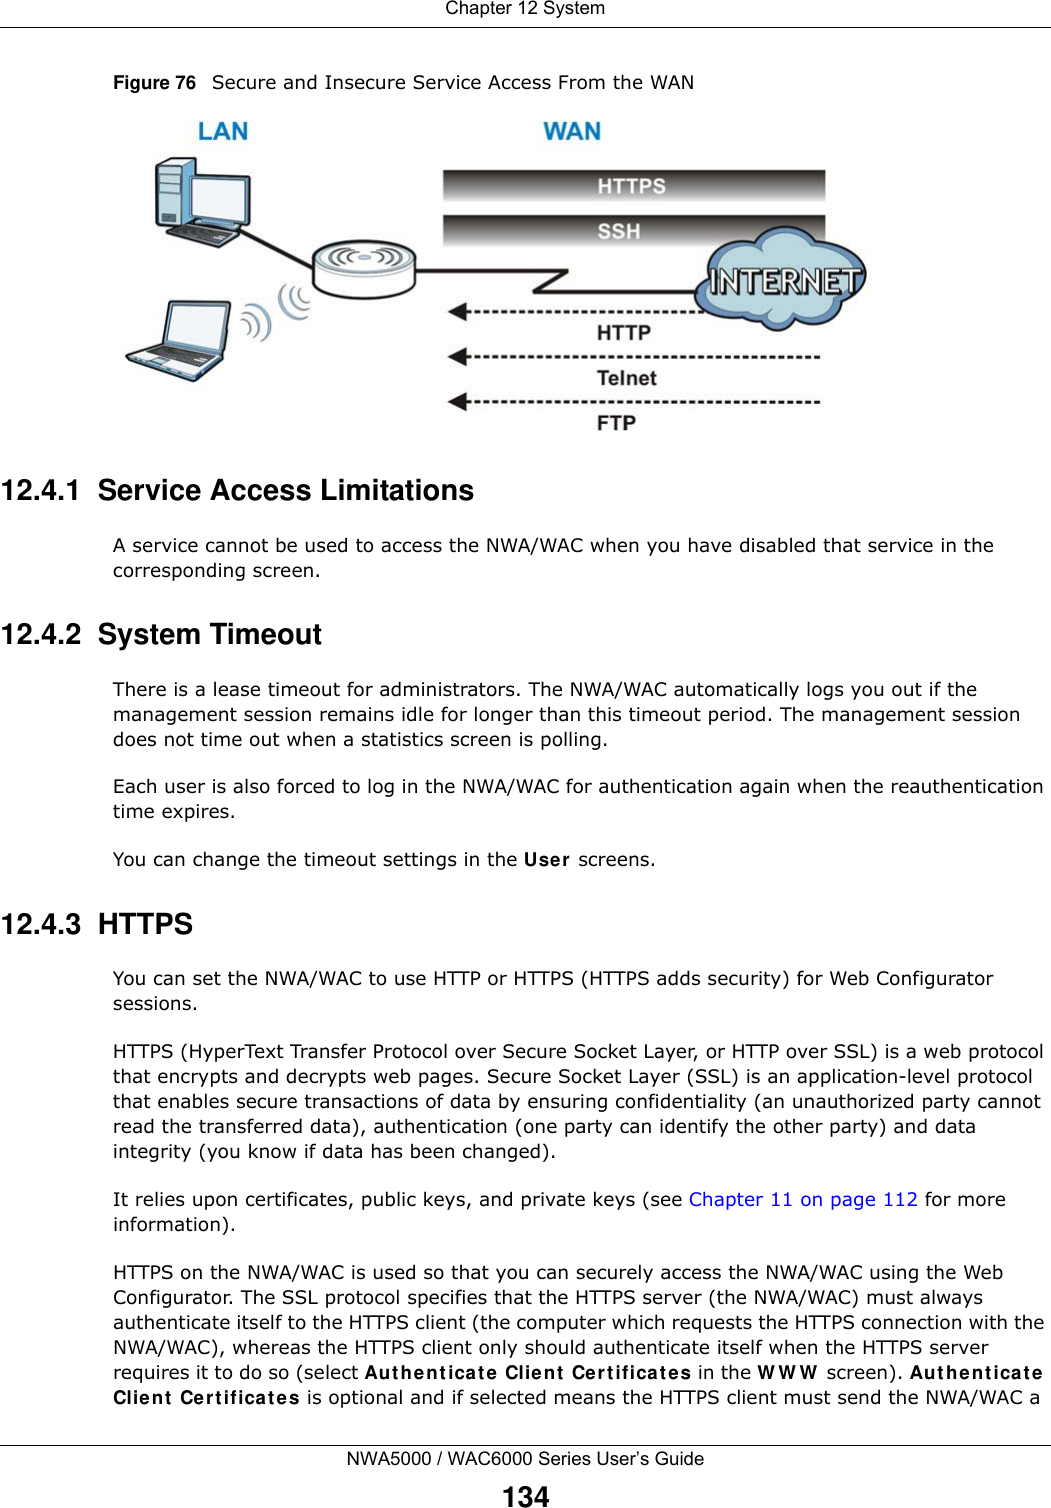 Chapter 12 SystemNWA5000 / WAC6000 Series User’s Guide134Figure 76   Secure and Insecure Service Access From the WAN12.4.1  Service Access LimitationsA service cannot be used to access the NWA/WAC when you have disabled that service in the corresponding screen.12.4.2  System TimeoutThere is a lease timeout for administrators. The NWA/WAC automatically logs you out if the management session remains idle for longer than this timeout period. The management session does not time out when a statistics screen is polling. Each user is also forced to log in the NWA/WAC for authentication again when the reauthentication time expires. You can change the timeout settings in the User  screens.12.4.3  HTTPSYou can set the NWA/WAC to use HTTP or HTTPS (HTTPS adds security) for Web Configurator sessions. HTTPS (HyperText Transfer Protocol over Secure Socket Layer, or HTTP over SSL) is a web protocol that encrypts and decrypts web pages. Secure Socket Layer (SSL) is an application-level protocol that enables secure transactions of data by ensuring confidentiality (an unauthorized party cannot read the transferred data), authentication (one party can identify the other party) and data integrity (you know if data has been changed). It relies upon certificates, public keys, and private keys (see Chapter 11 on page 112 for more information).HTTPS on the NWA/WAC is used so that you can securely access the NWA/WAC using the Web Configurator. The SSL protocol specifies that the HTTPS server (the NWA/WAC) must always authenticate itself to the HTTPS client (the computer which requests the HTTPS connection with the NWA/WAC), whereas the HTTPS client only should authenticate itself when the HTTPS server requires it to do so (select Auth ent ica te  Clie nt  Cert ificat es in the W W W  screen). Aut hent icat e Client  Cert ificat es is optional and if selected means the HTTPS client must send the NWA/WAC a 